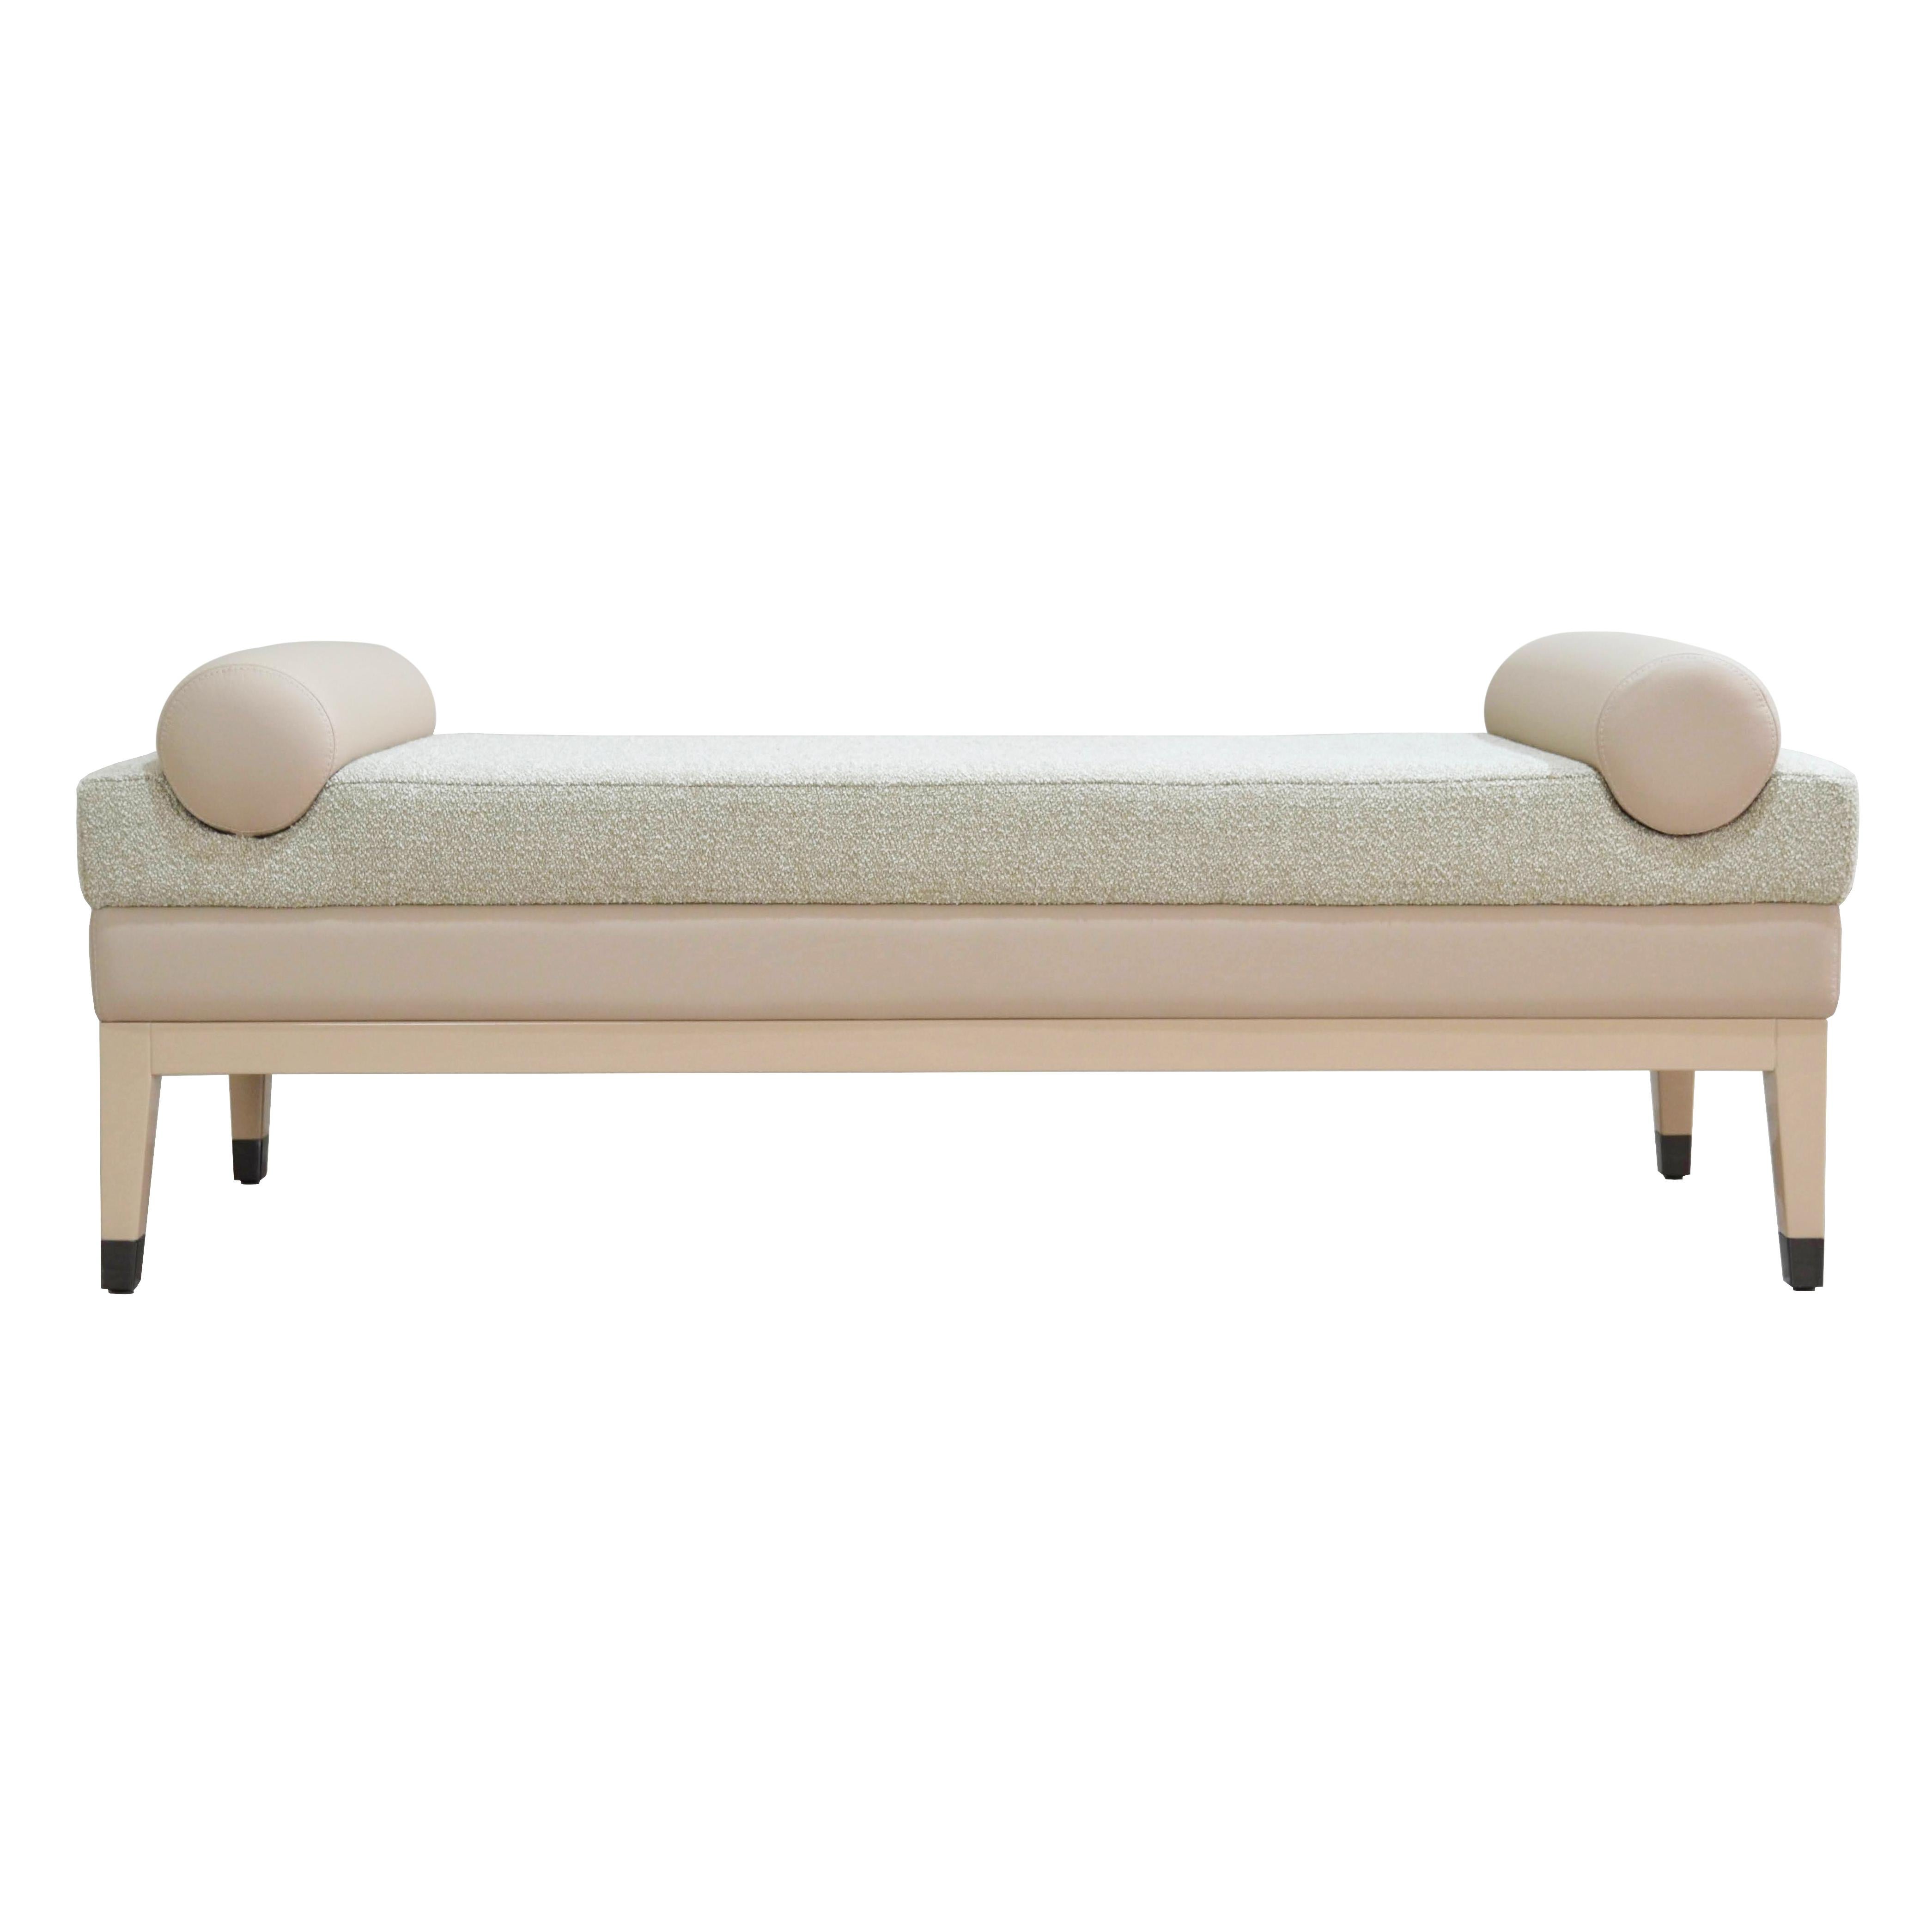 The bench is a versatile and elegant piece, which has found its place in museums, offices, and homes. The four legs are offering up a simple and understated quality which is sure to compliment any interior environment. 